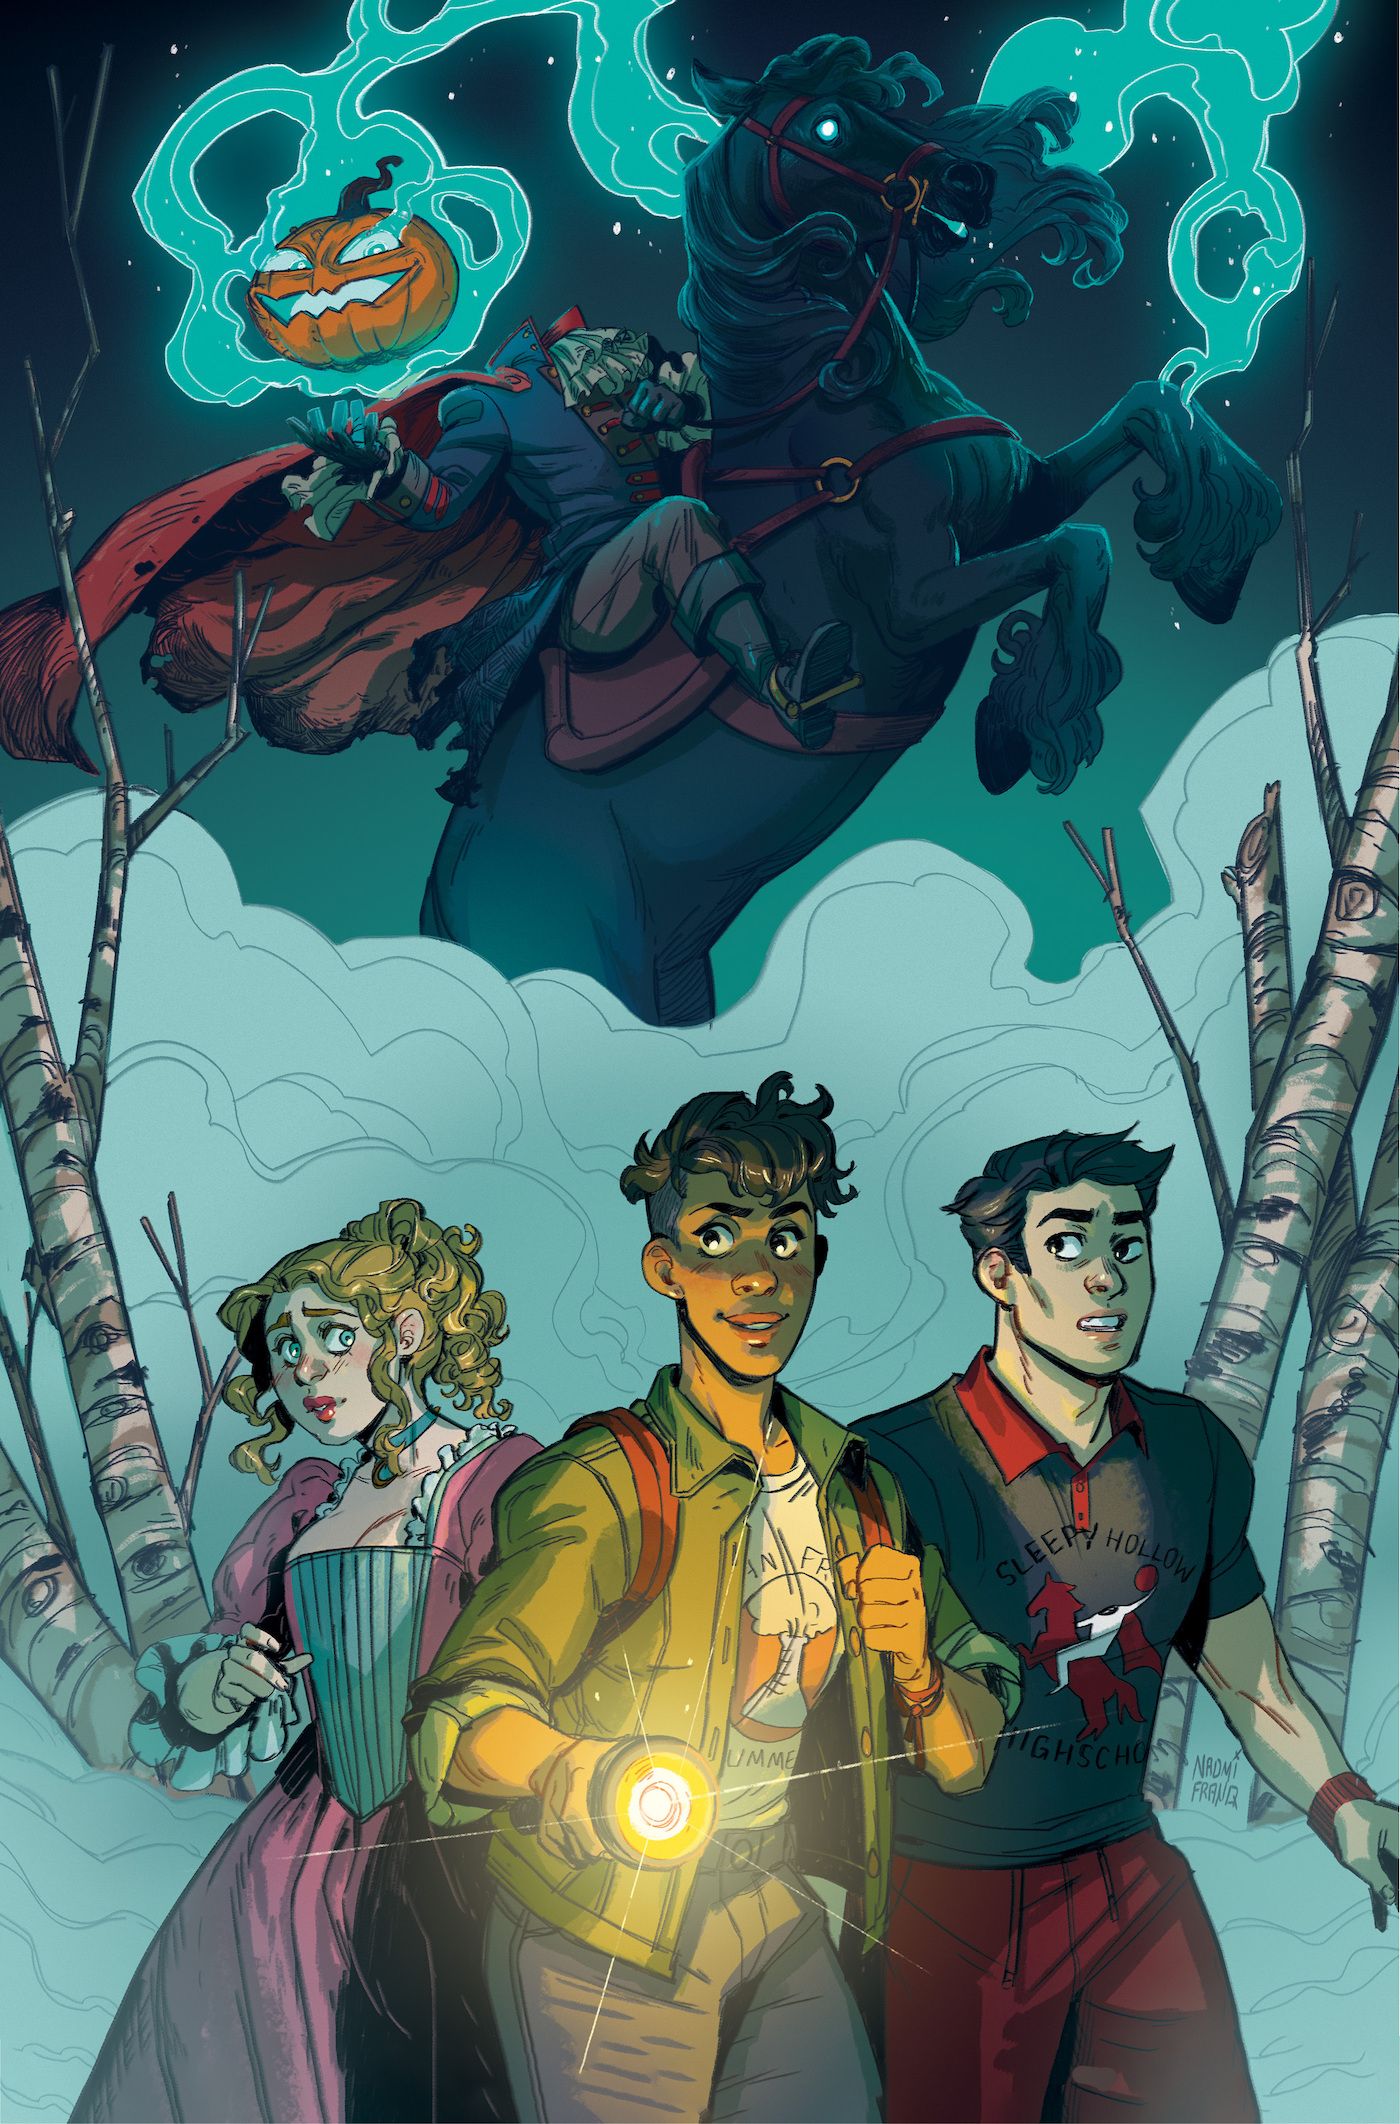 Legend of Sleepy Hollow Becomes a Queer Teen Romance in New Graphic Novel